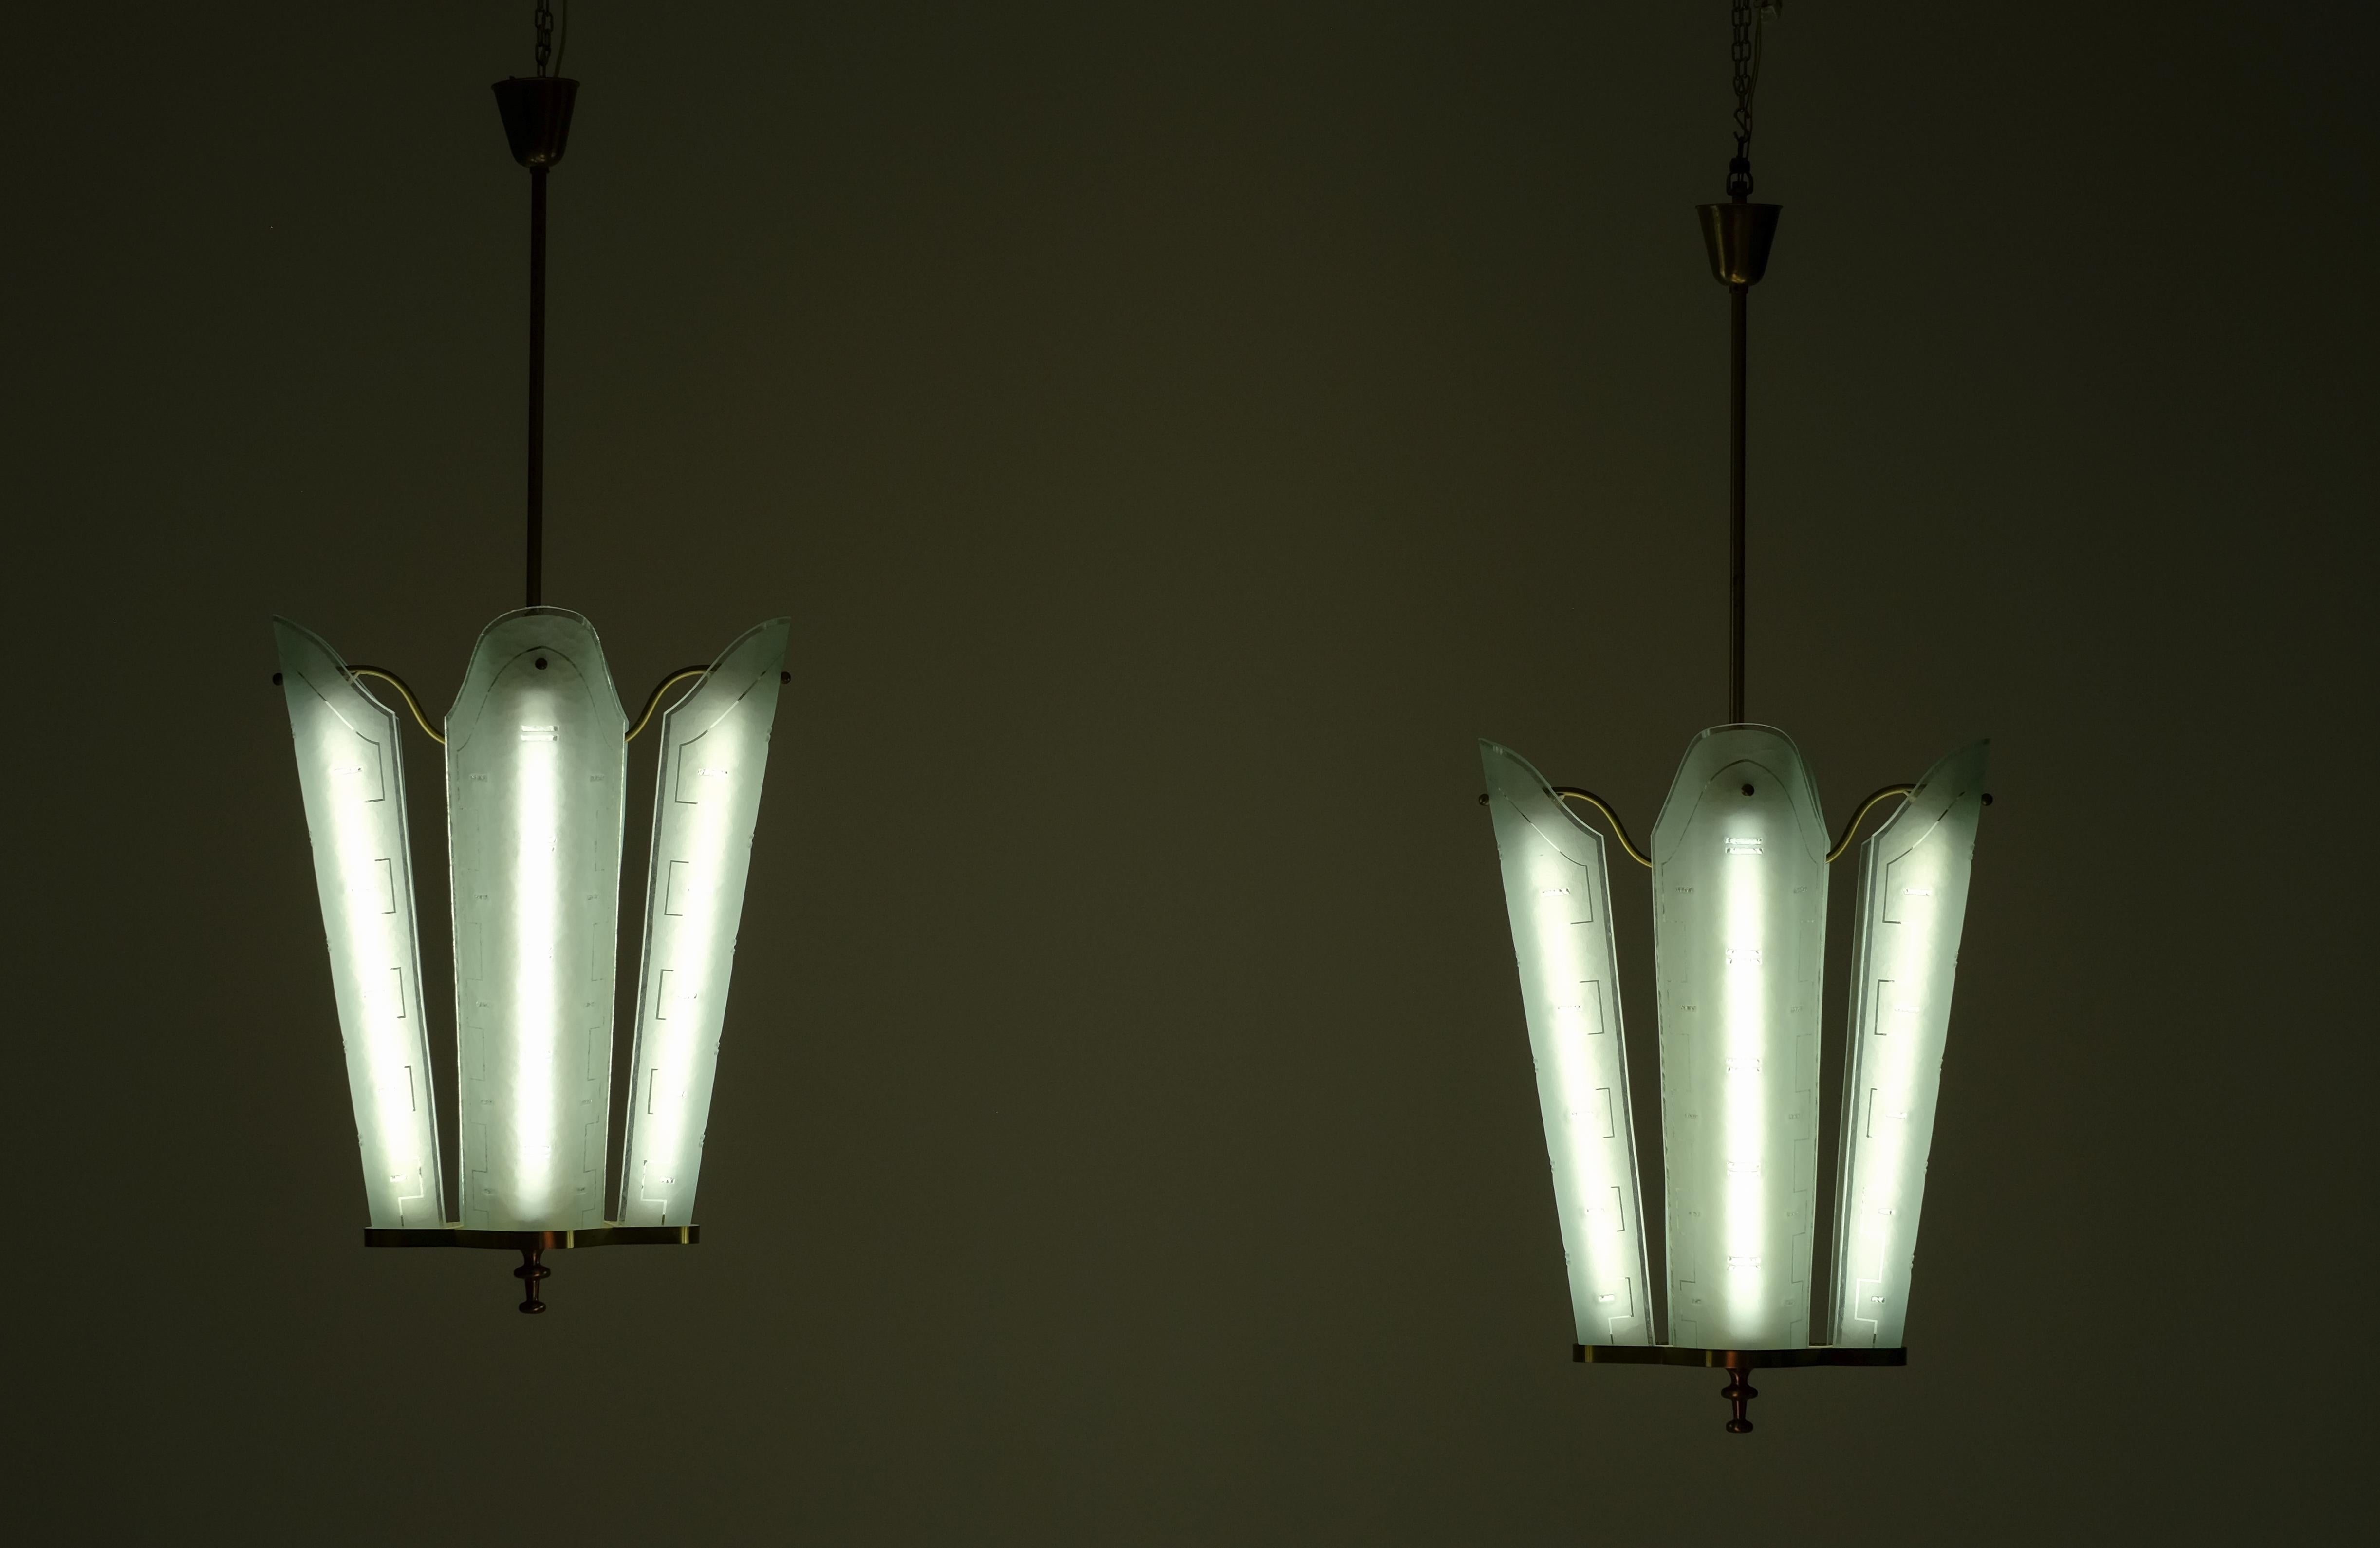 Bo Notini Ceiling Lamps by Glössner, Sweden, 1950s For Sale 2